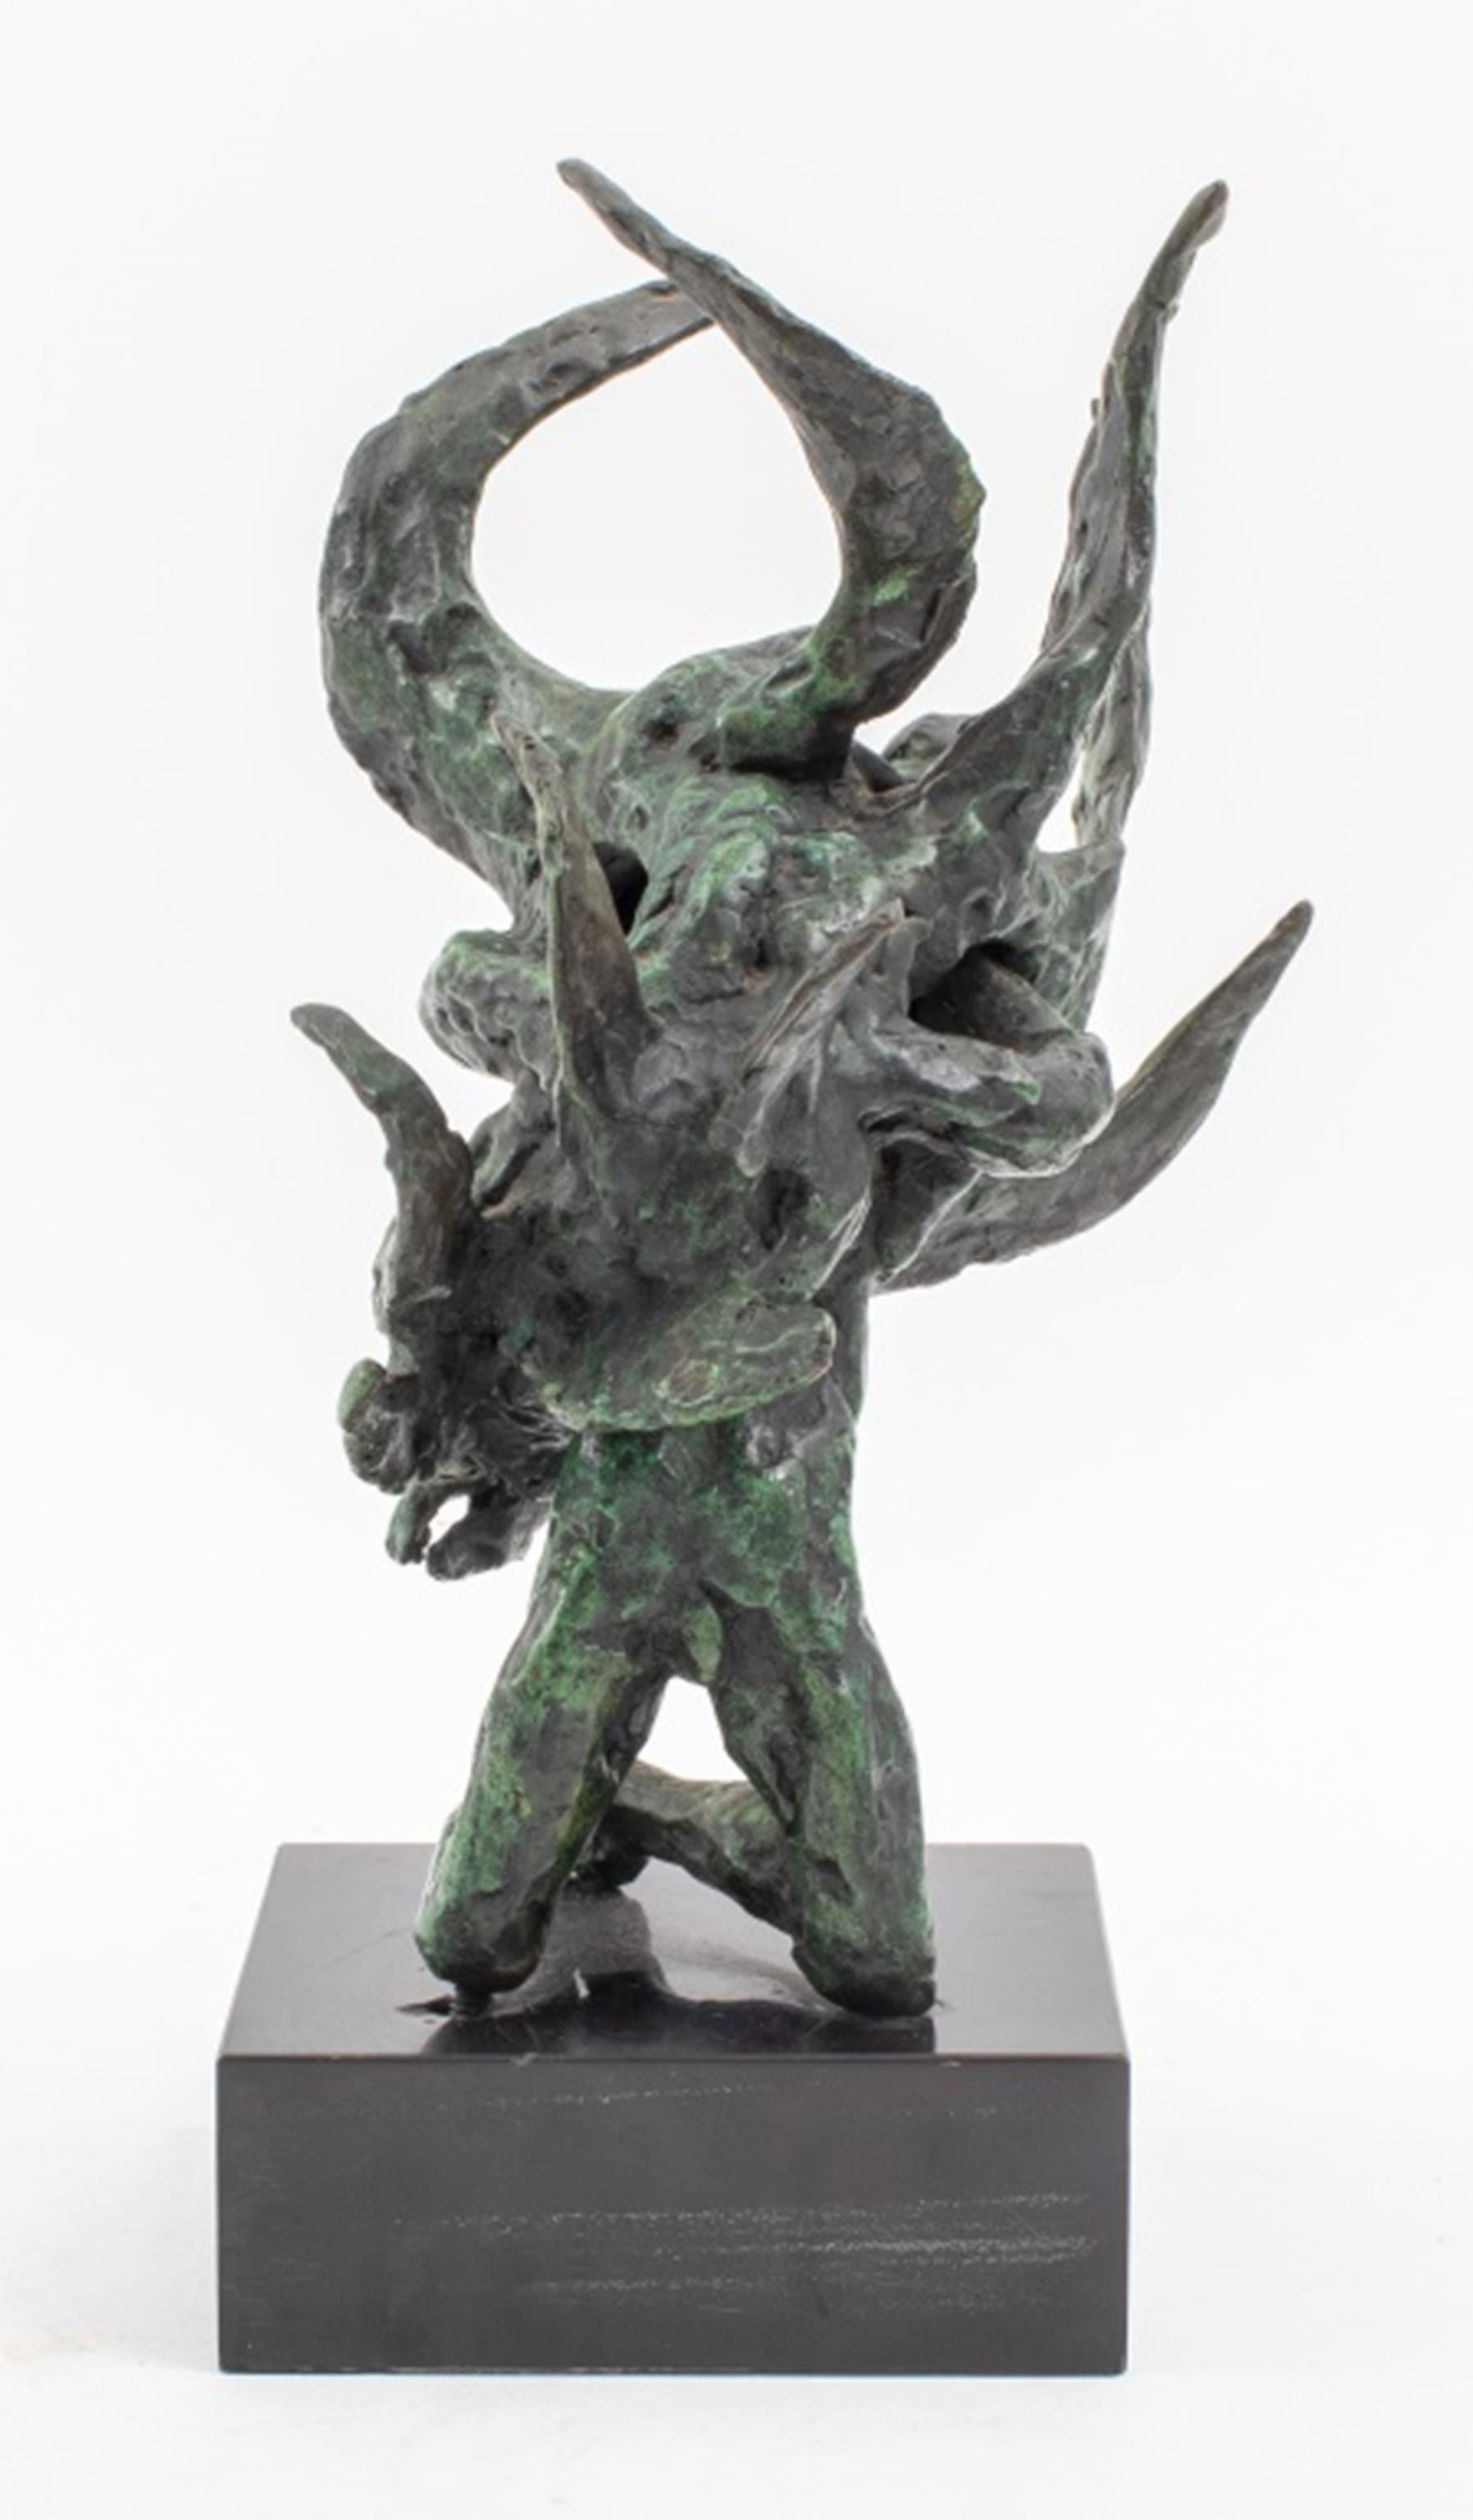 Modern Surrealist cast bronze sculpture on marble base, depicting a nude man holding a winged humanoid creature in embrace, circa 1970, likely made by a New York artist; illegibly signed and numbered underneath one of the kneeling man's